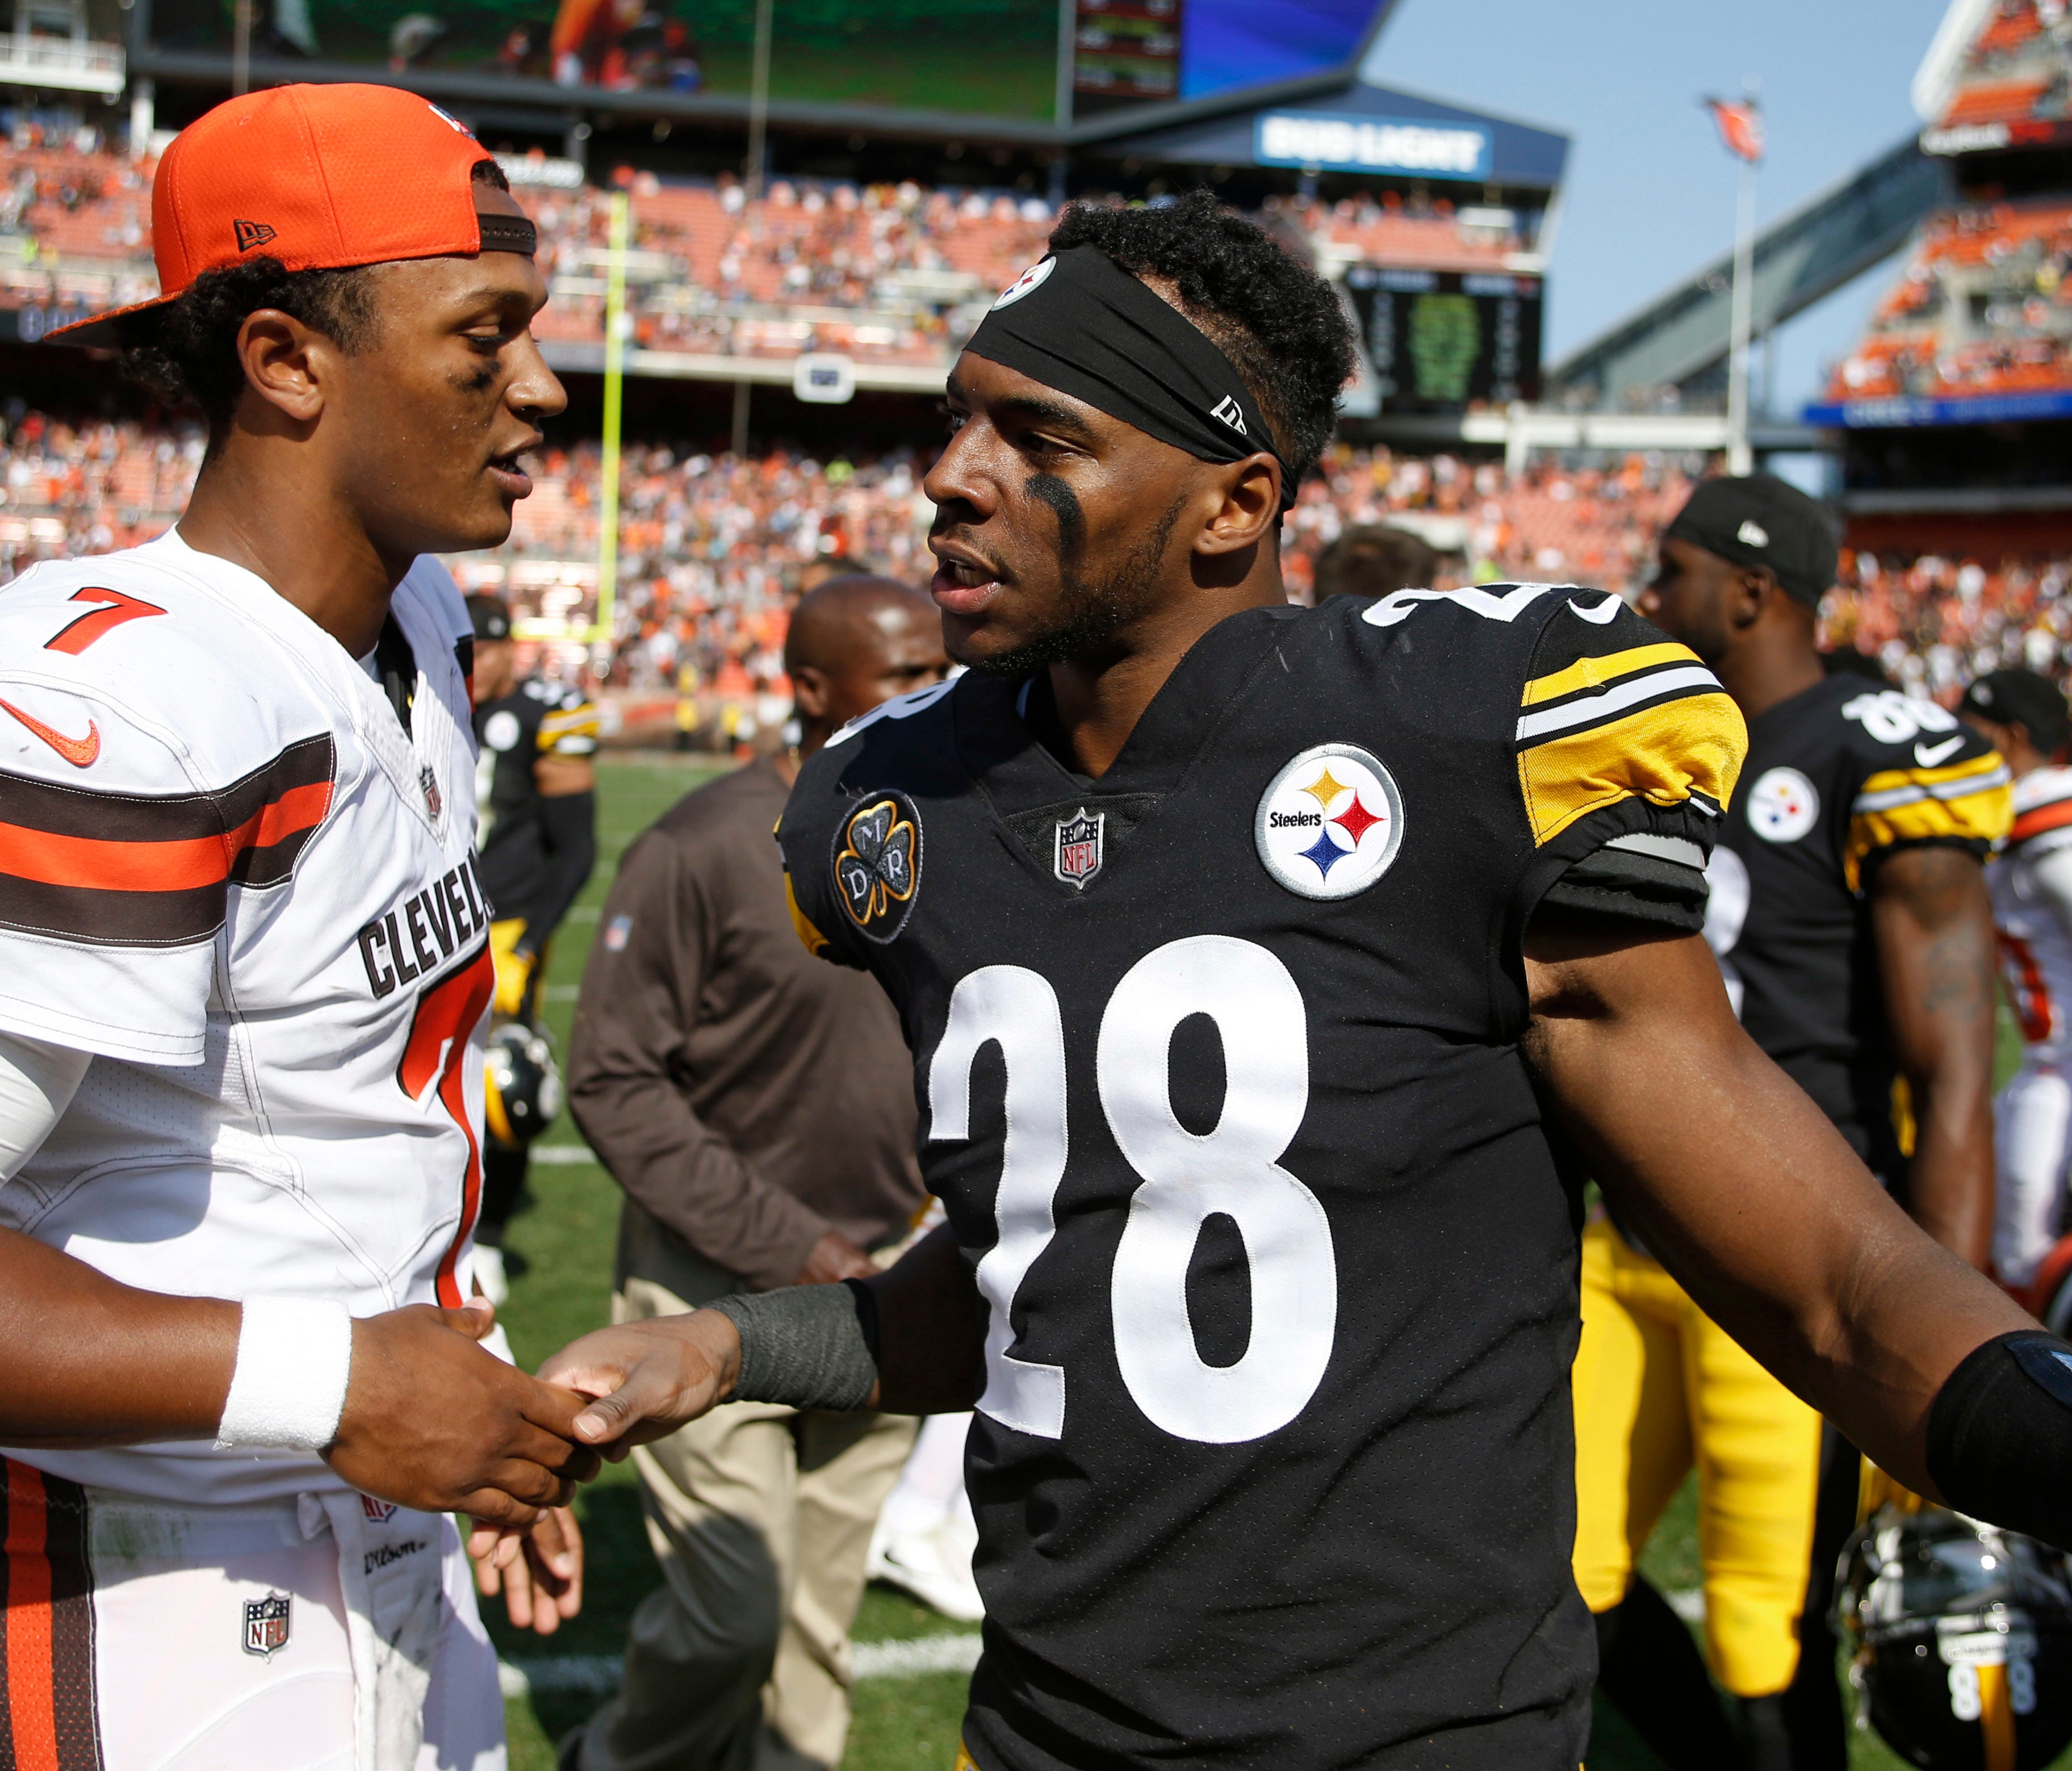 Cleveland Browns quarterback DeShone Kizer (7) greets Pittsburgh Steelers strong safety Sean Davis (28) after an NFL football game, Sunday, Sept. 10, 2017, in Cleveland.